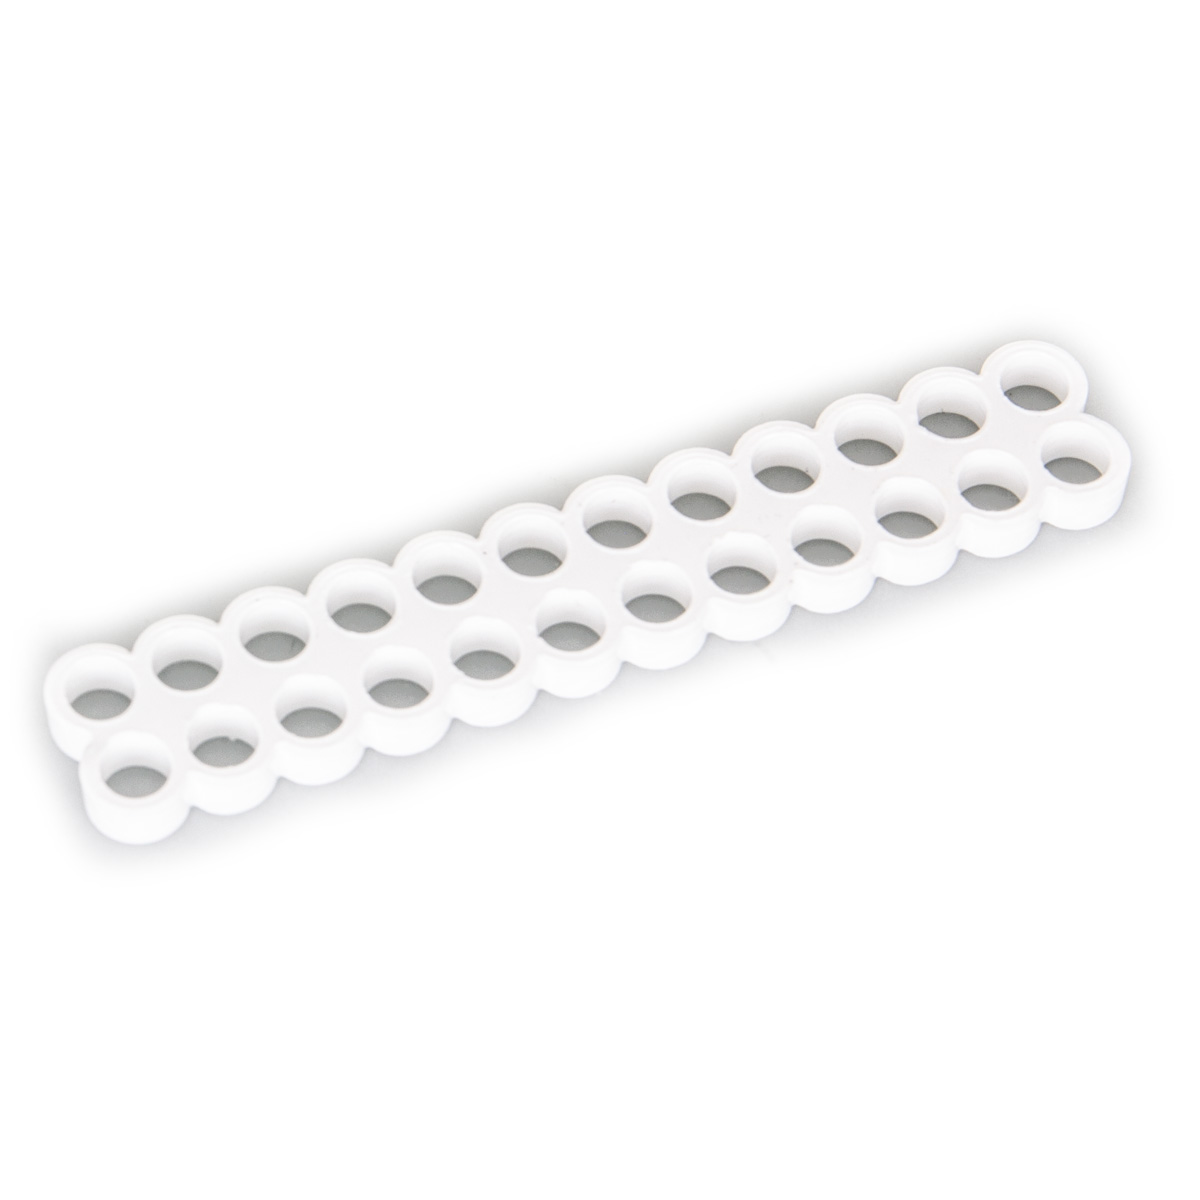 TechForge 24 Slot Stealth Cable Comb - White